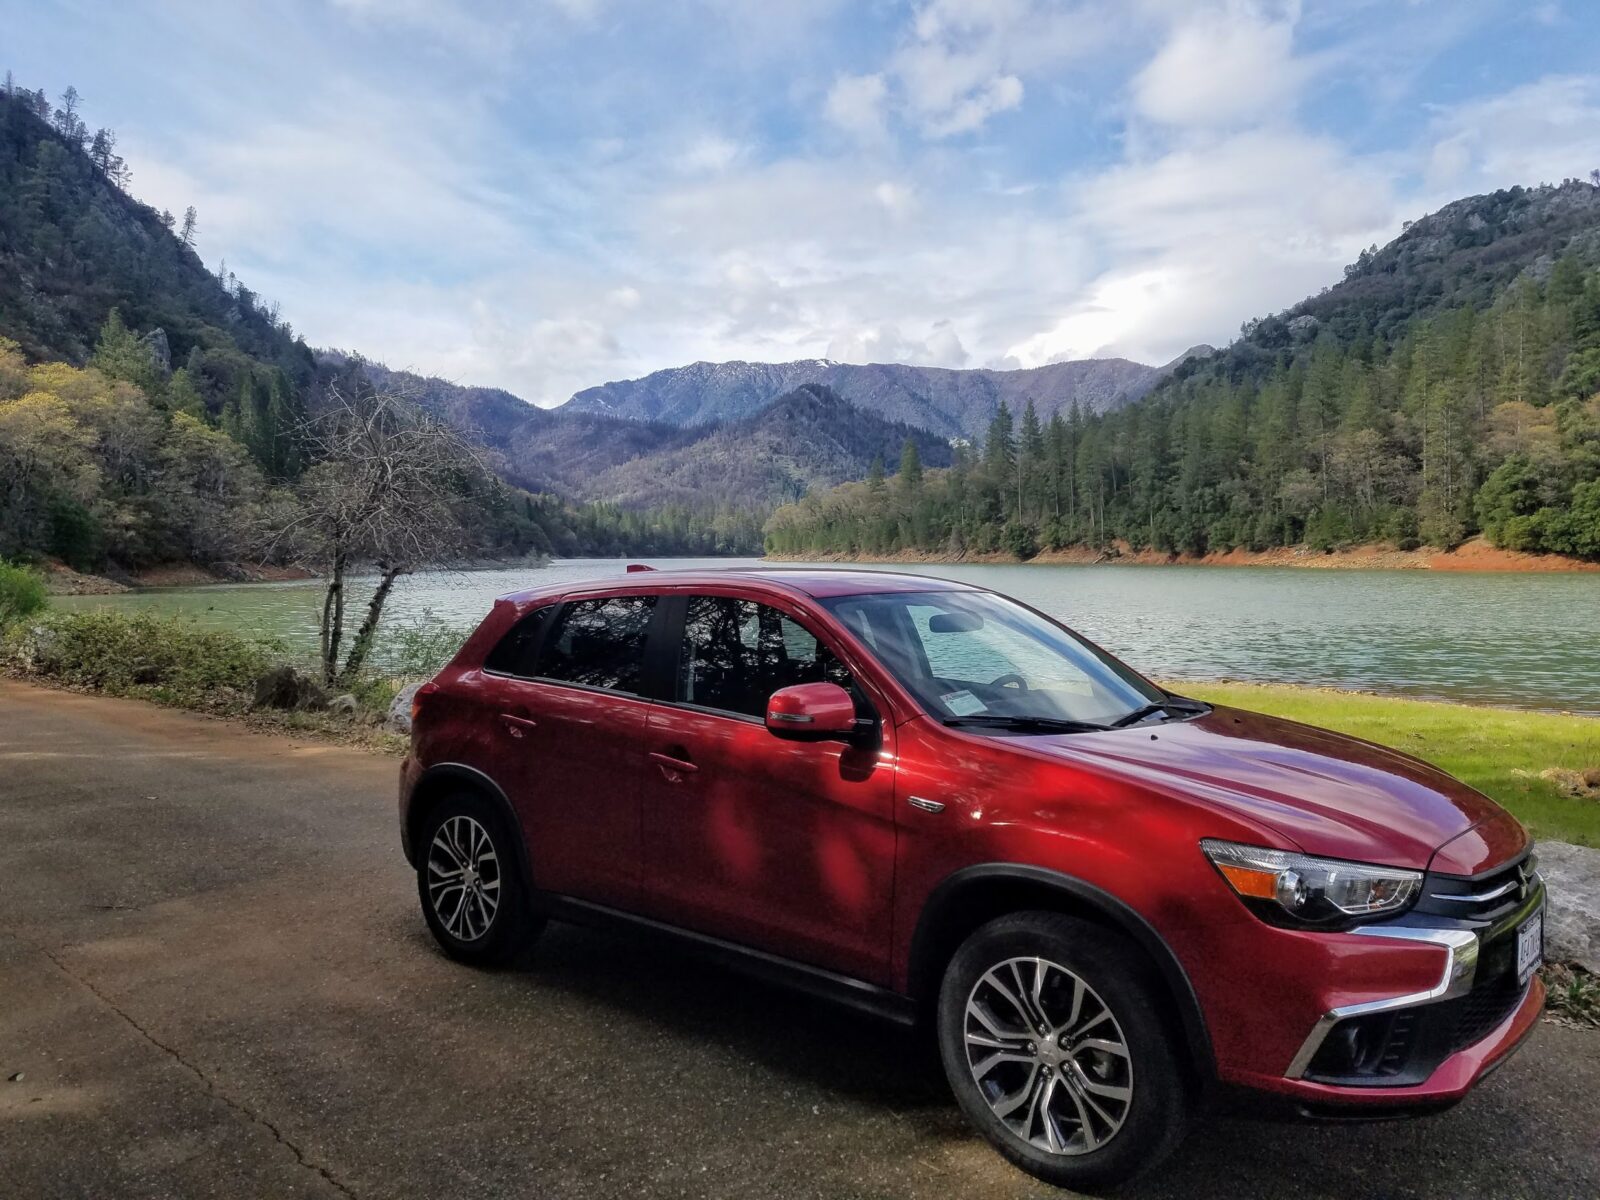 The 2019 Mitsubishi Outlander Sport I purchased brand new from West Mitsubishi in Orland, CA